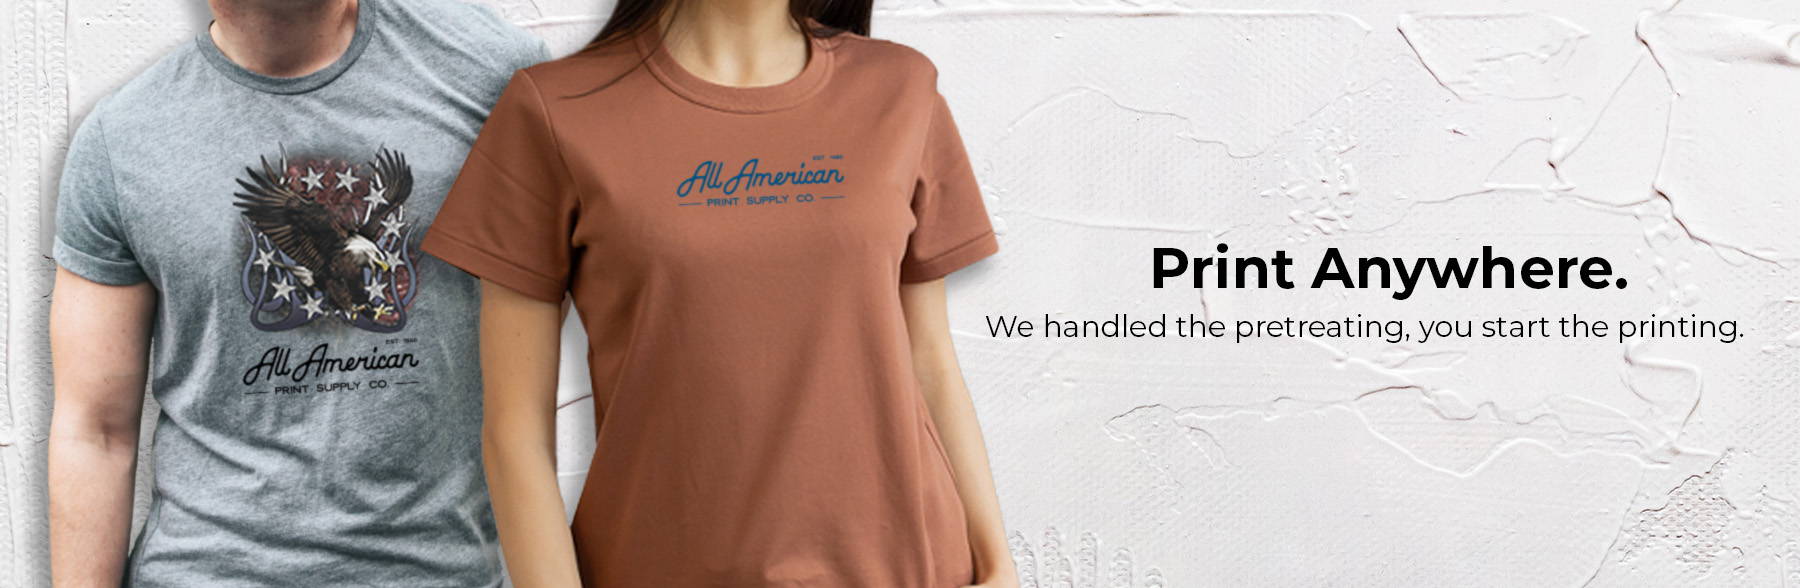 direct to garment pretreatment shirts and garments